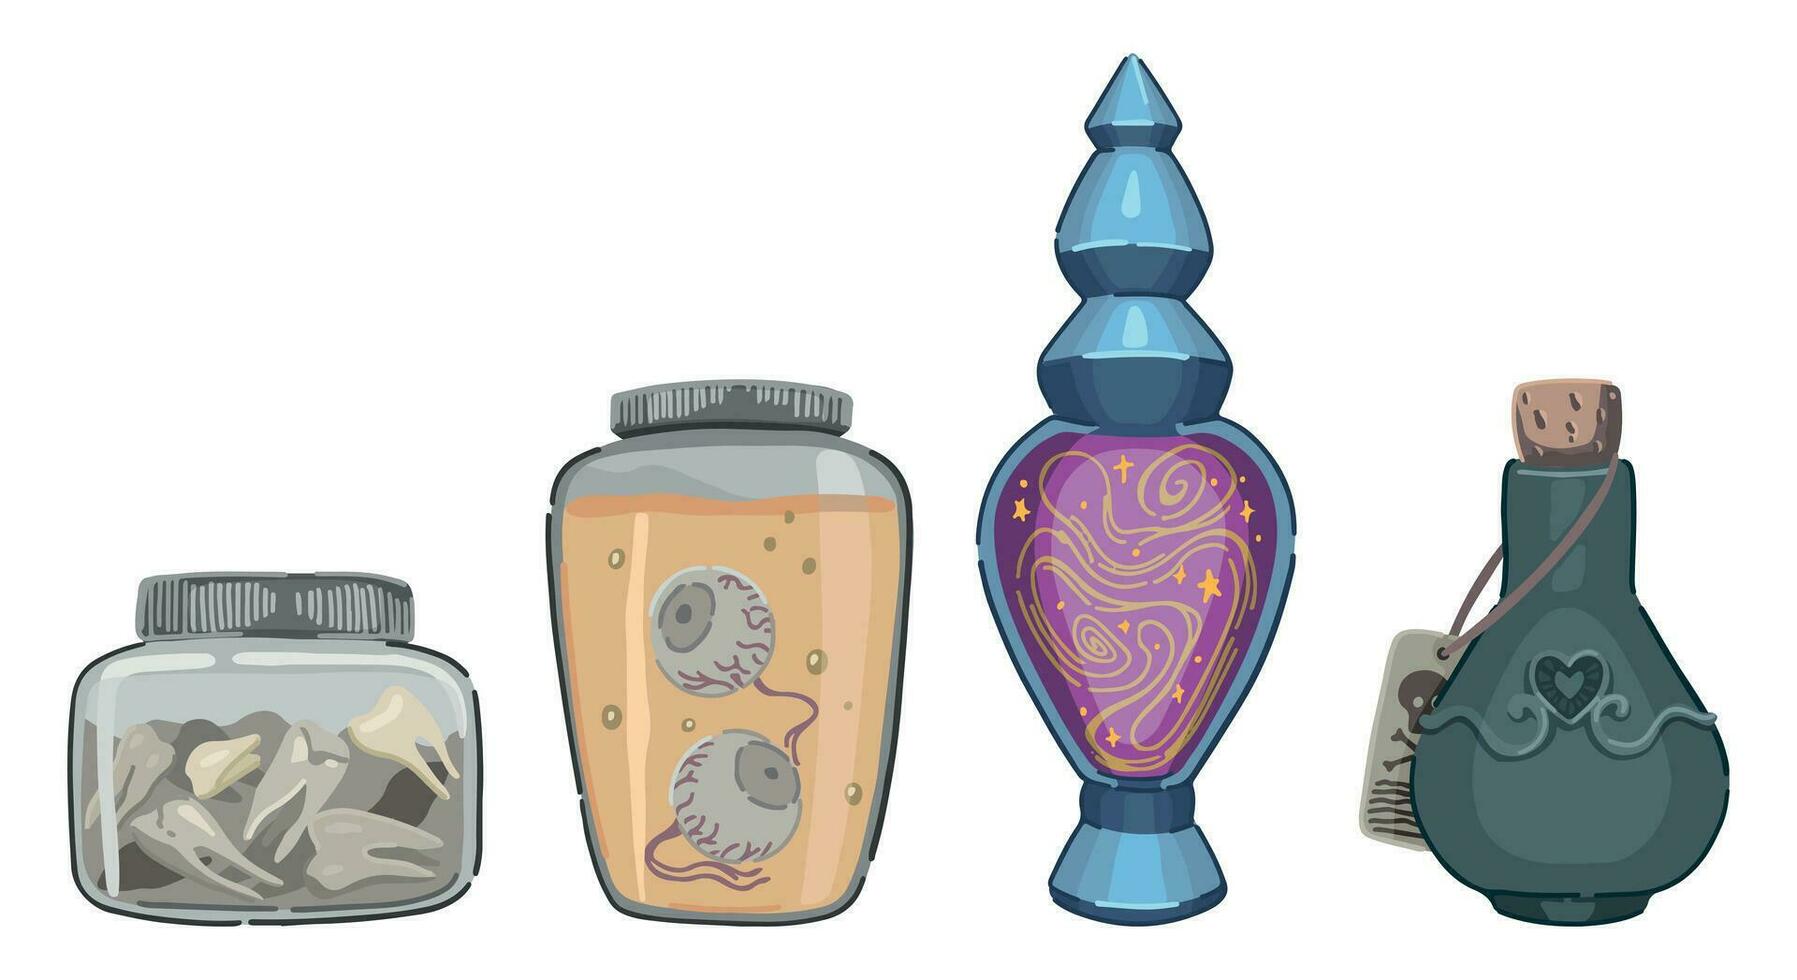 Witch jars doodles collection. Cartoon vector illustrations of glass bottles, mystical jars with eyes, teeth, love potion. Halloween mystery cliparts isolated on white.